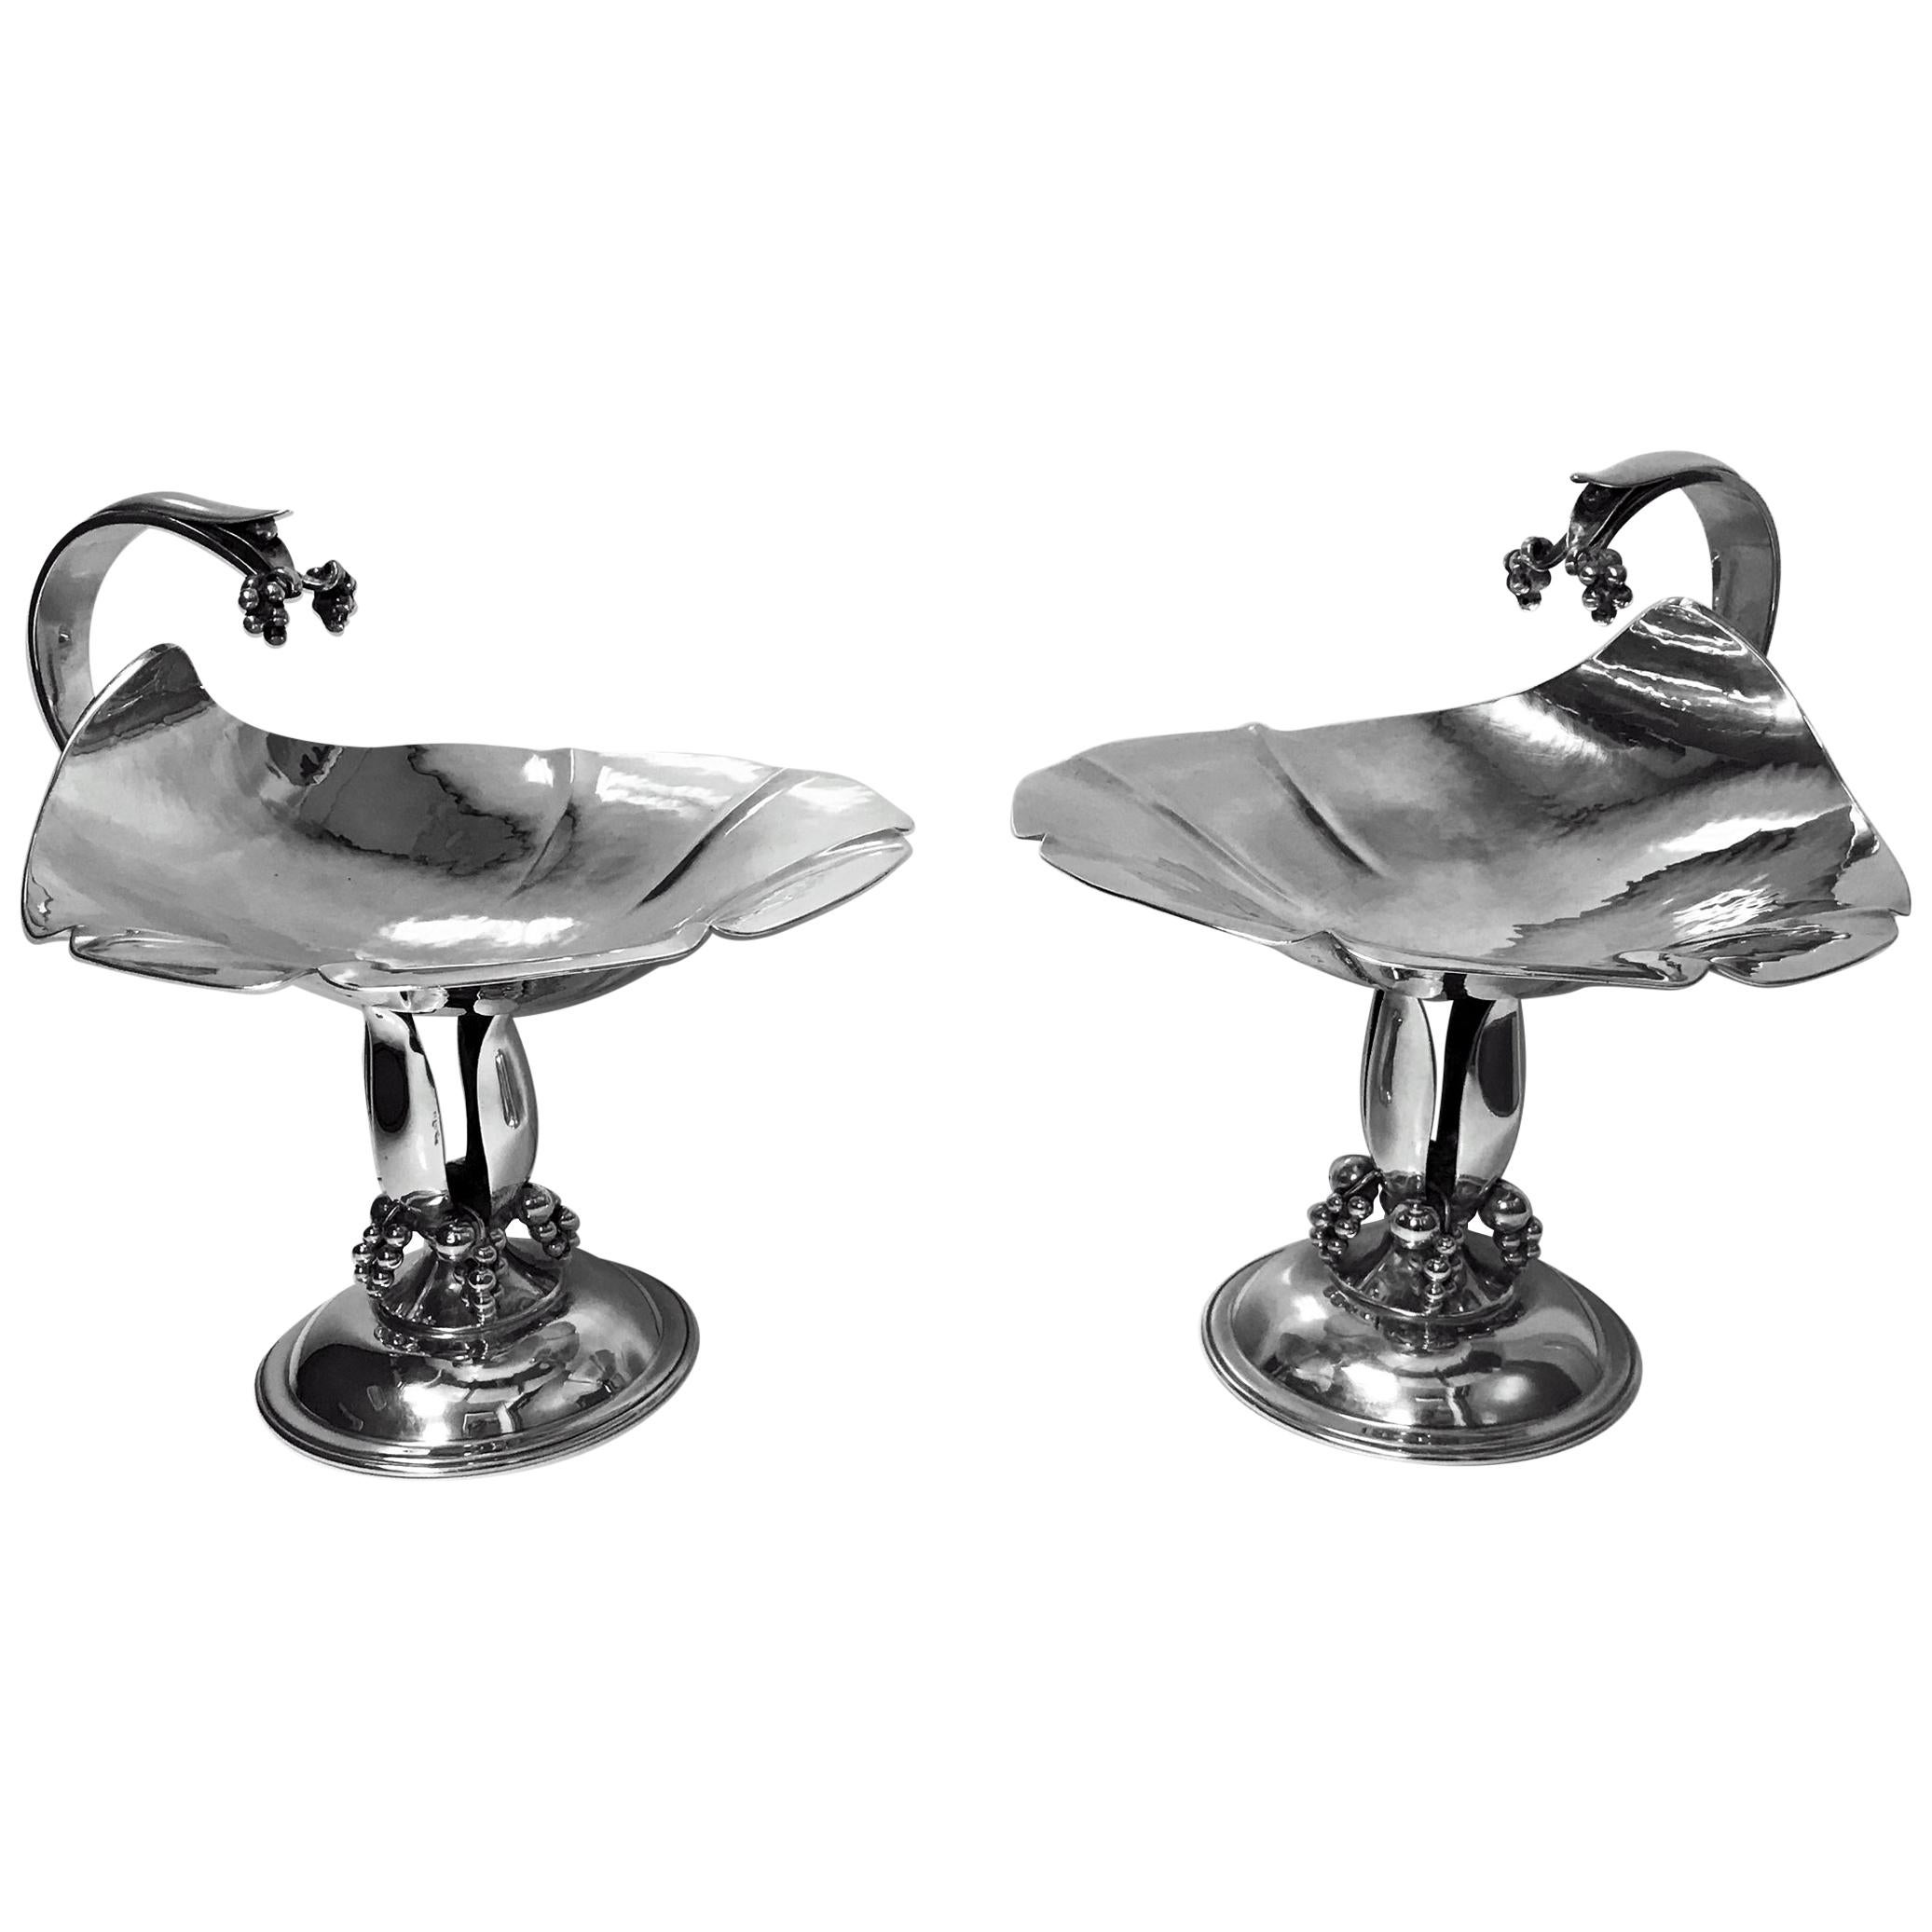 Pair of Carl Poul Petersen Sterling Silver Compotes, Montreal, circa 1940